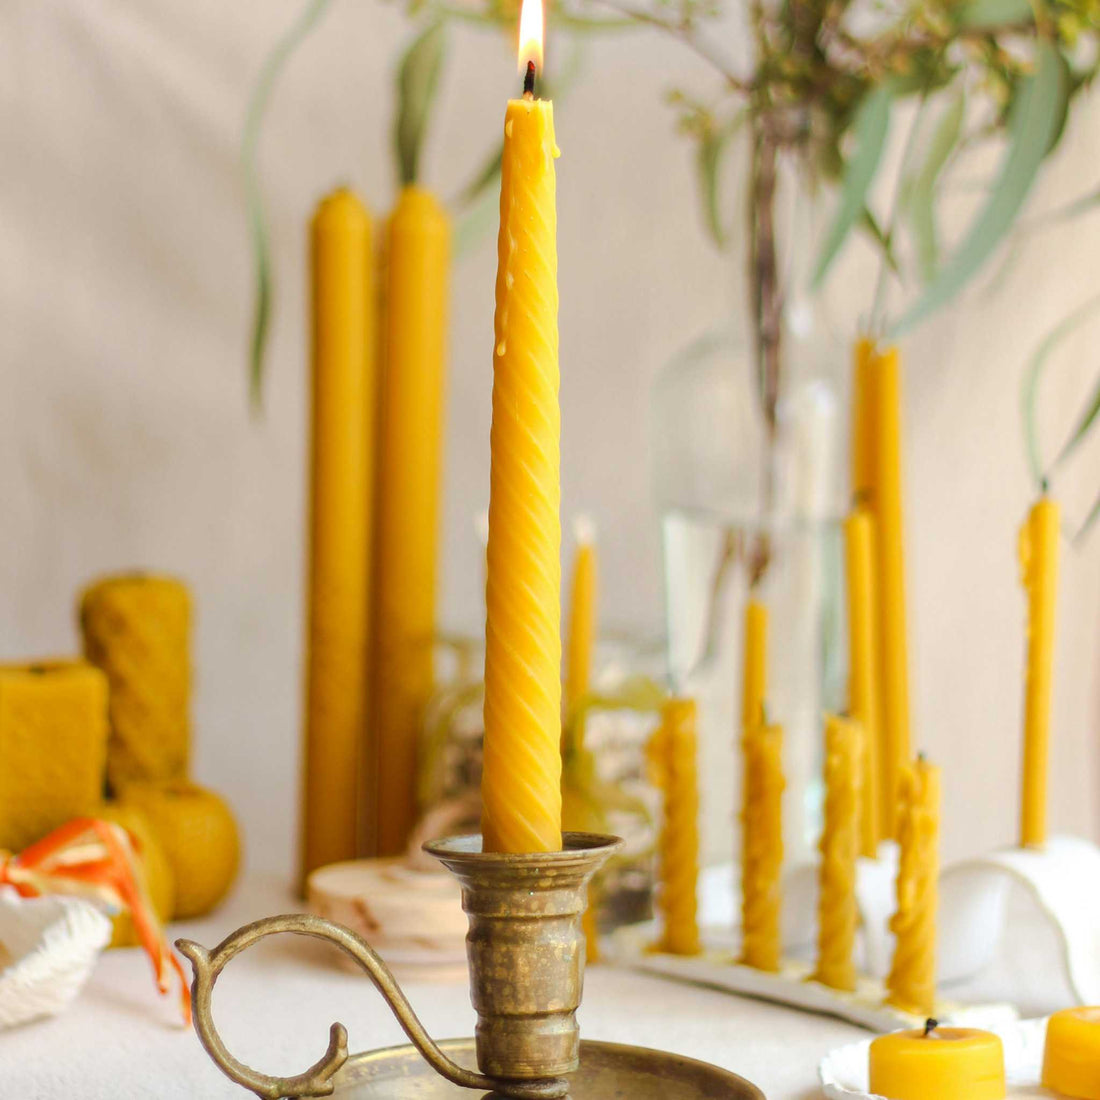 Lighting Up Easter: The Warmth of Beeswax Candles in Family Celebrations